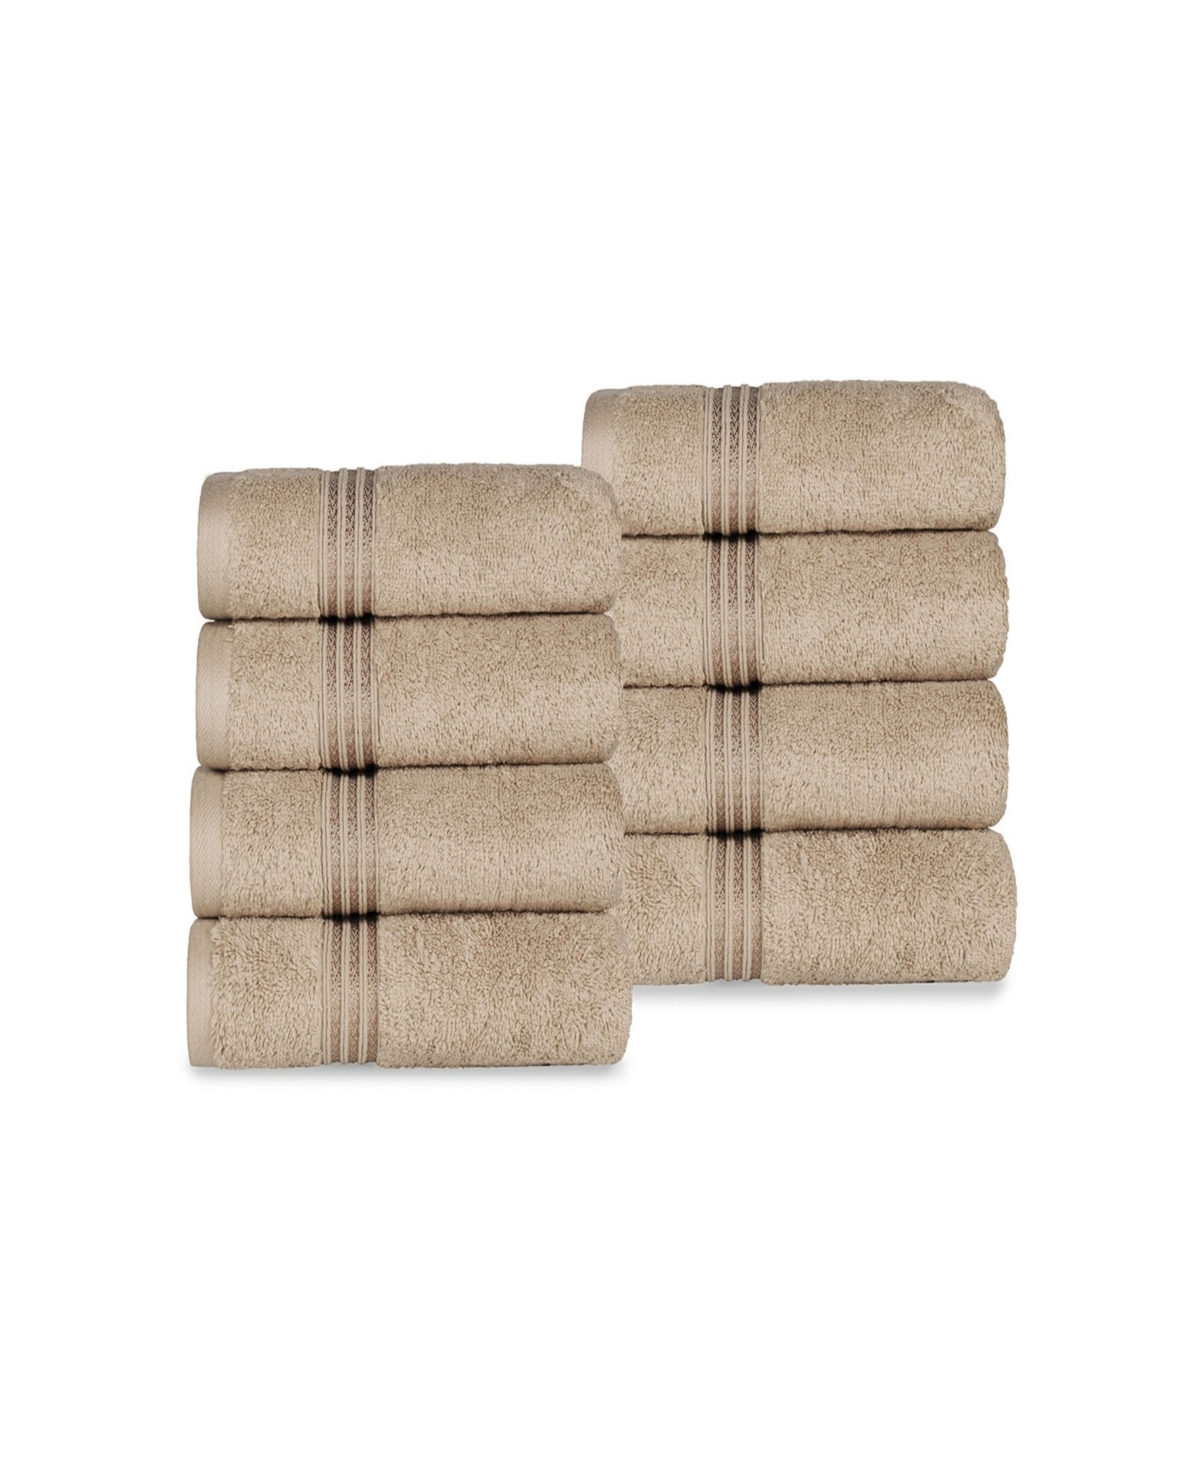 Superior Solid Quick Drying Absorbent 8 Piece Egyptian Cotton Hand Towel Set Bedding In Taupe